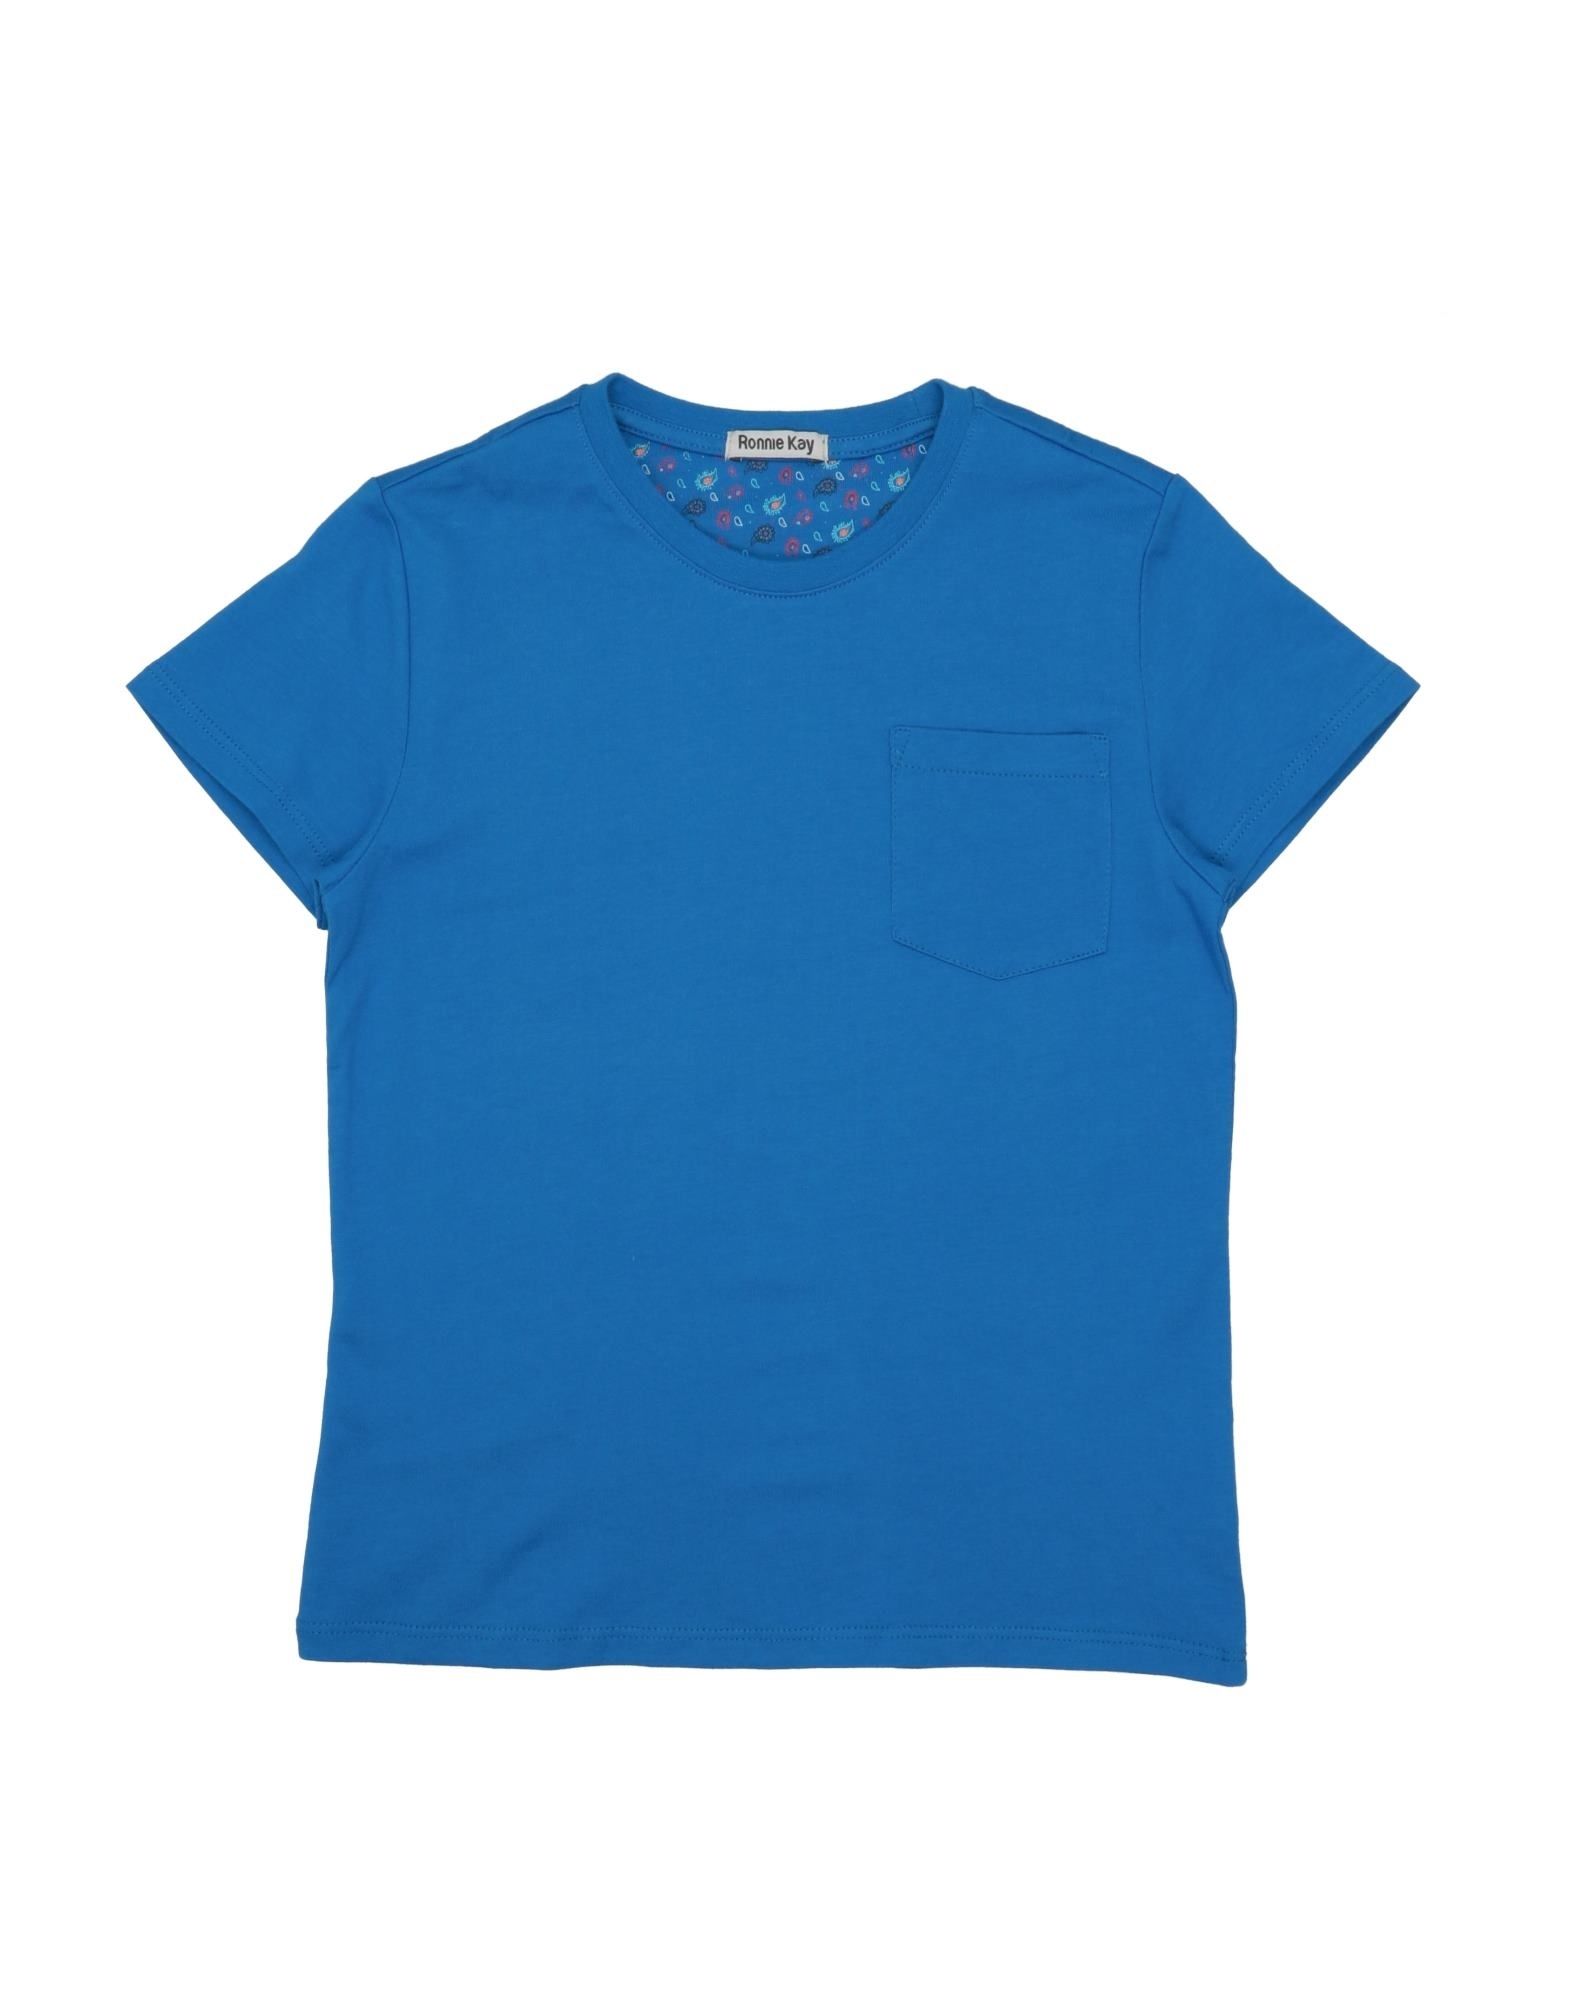 Ronnie Kay Kids' T-shirts In Blue